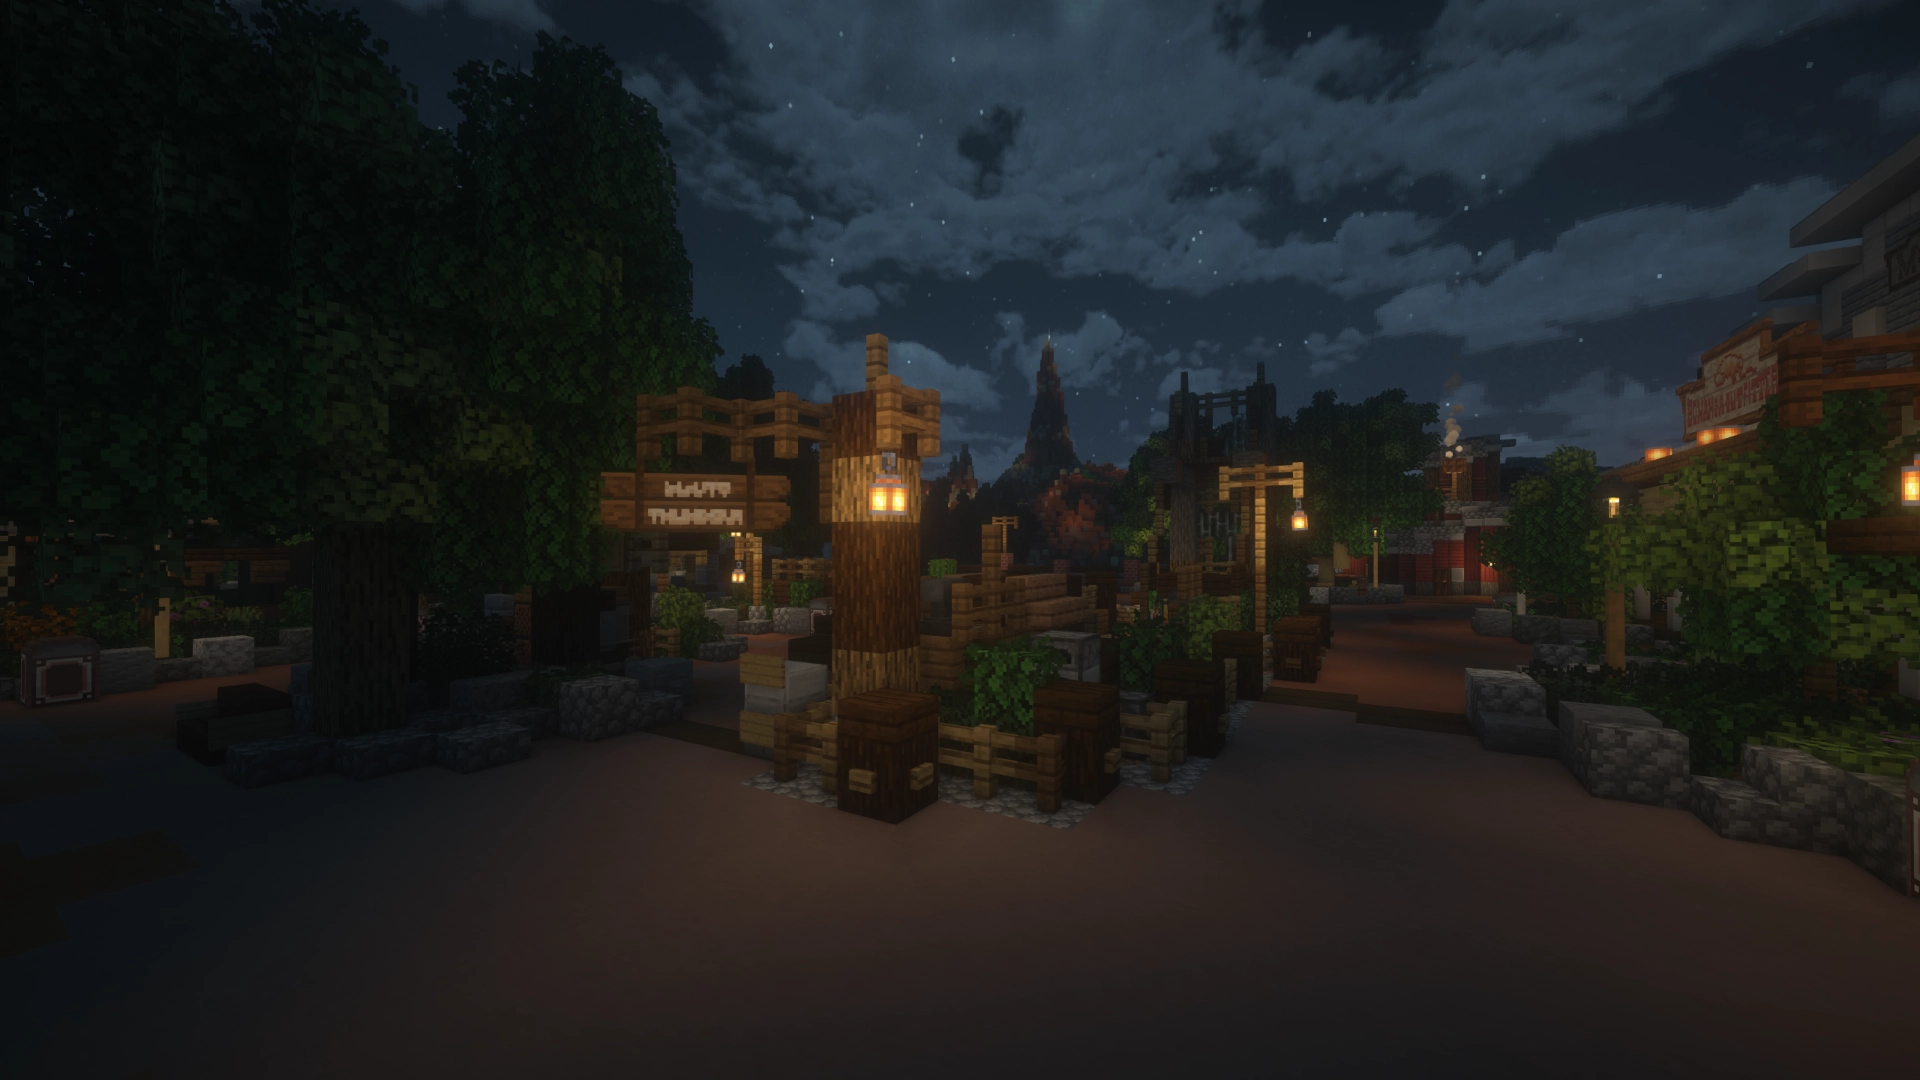 frontierland entrance at night